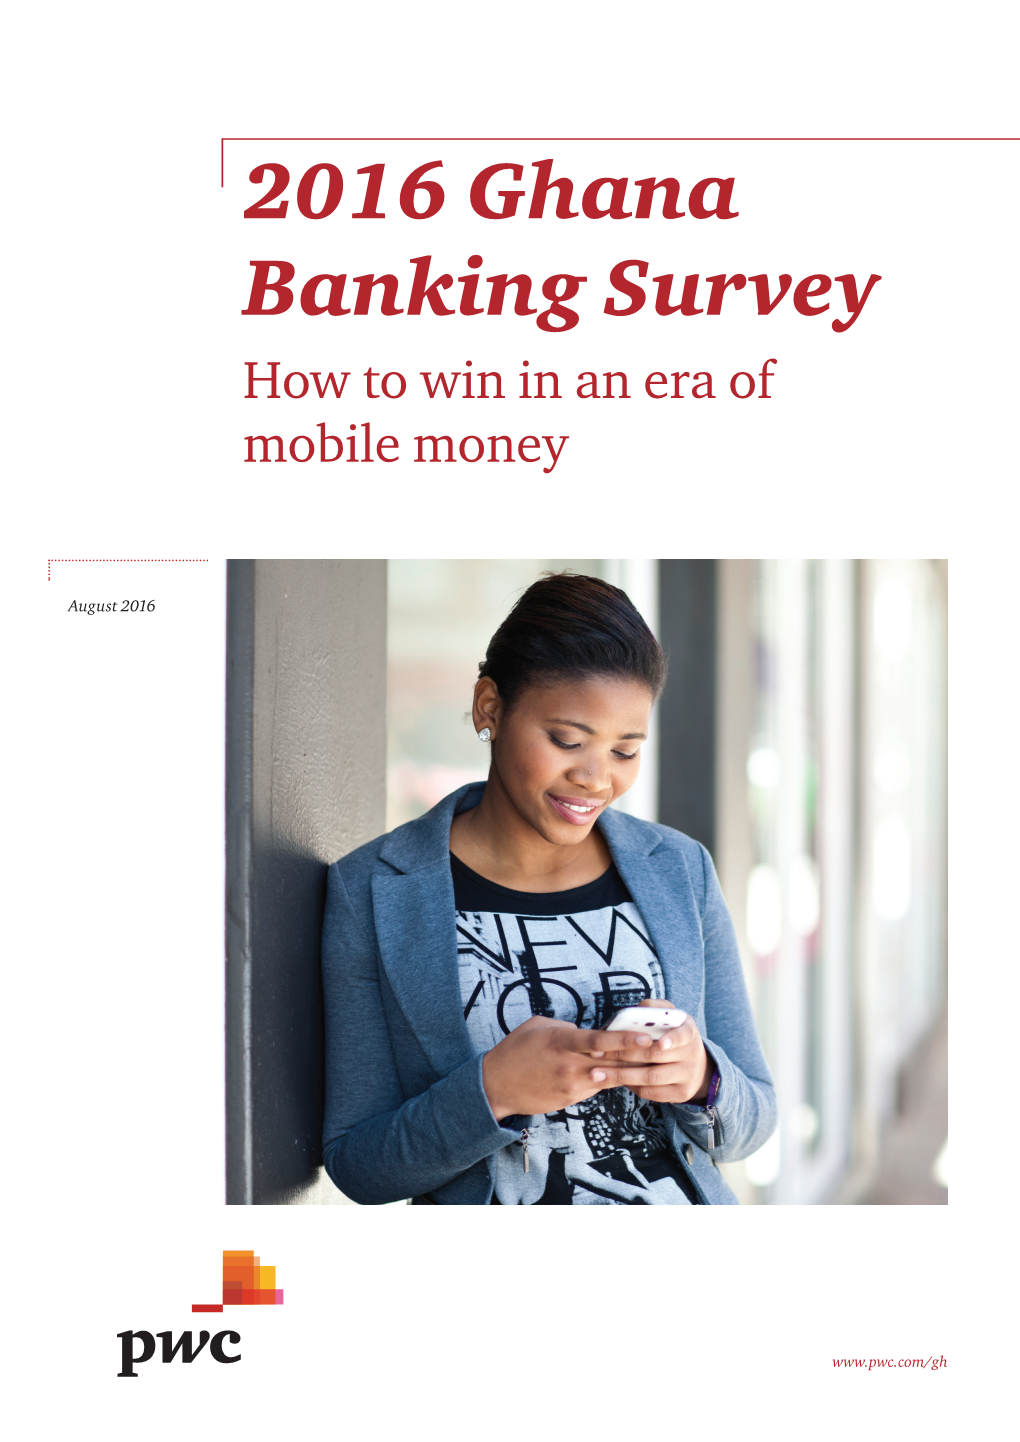 2016 Ghana Banking Survey How to Win in an Era of Mobile Money